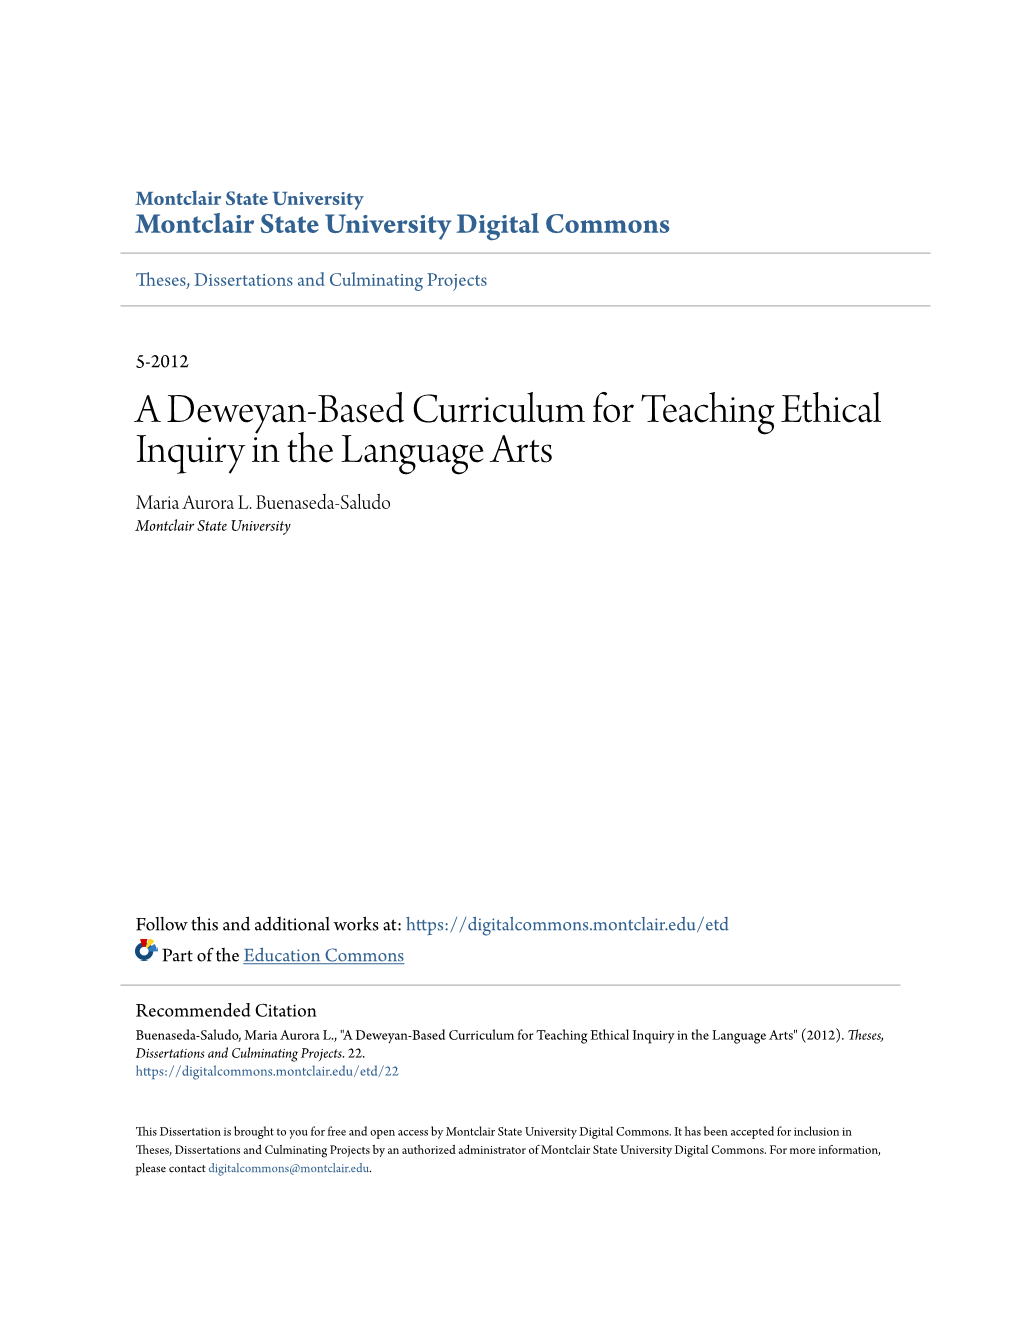 A Deweyan-Based Curriculum for Teaching Ethical Inquiry in the Language Arts Maria Aurora L